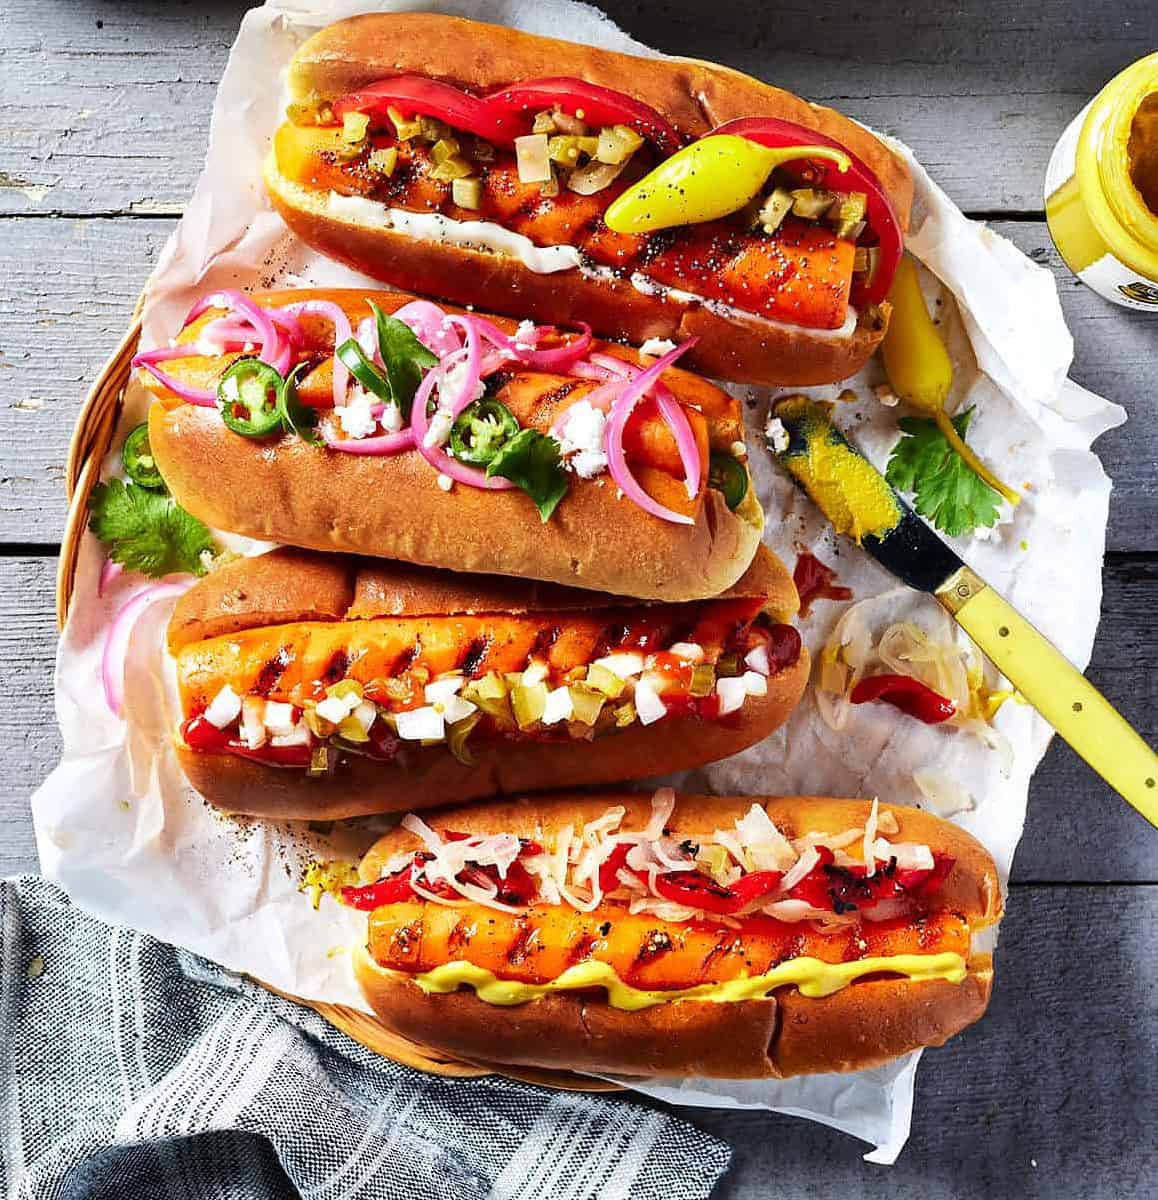  Here's a hot tip: top your vegan dog with all your favorite condiments for a tasty meal.